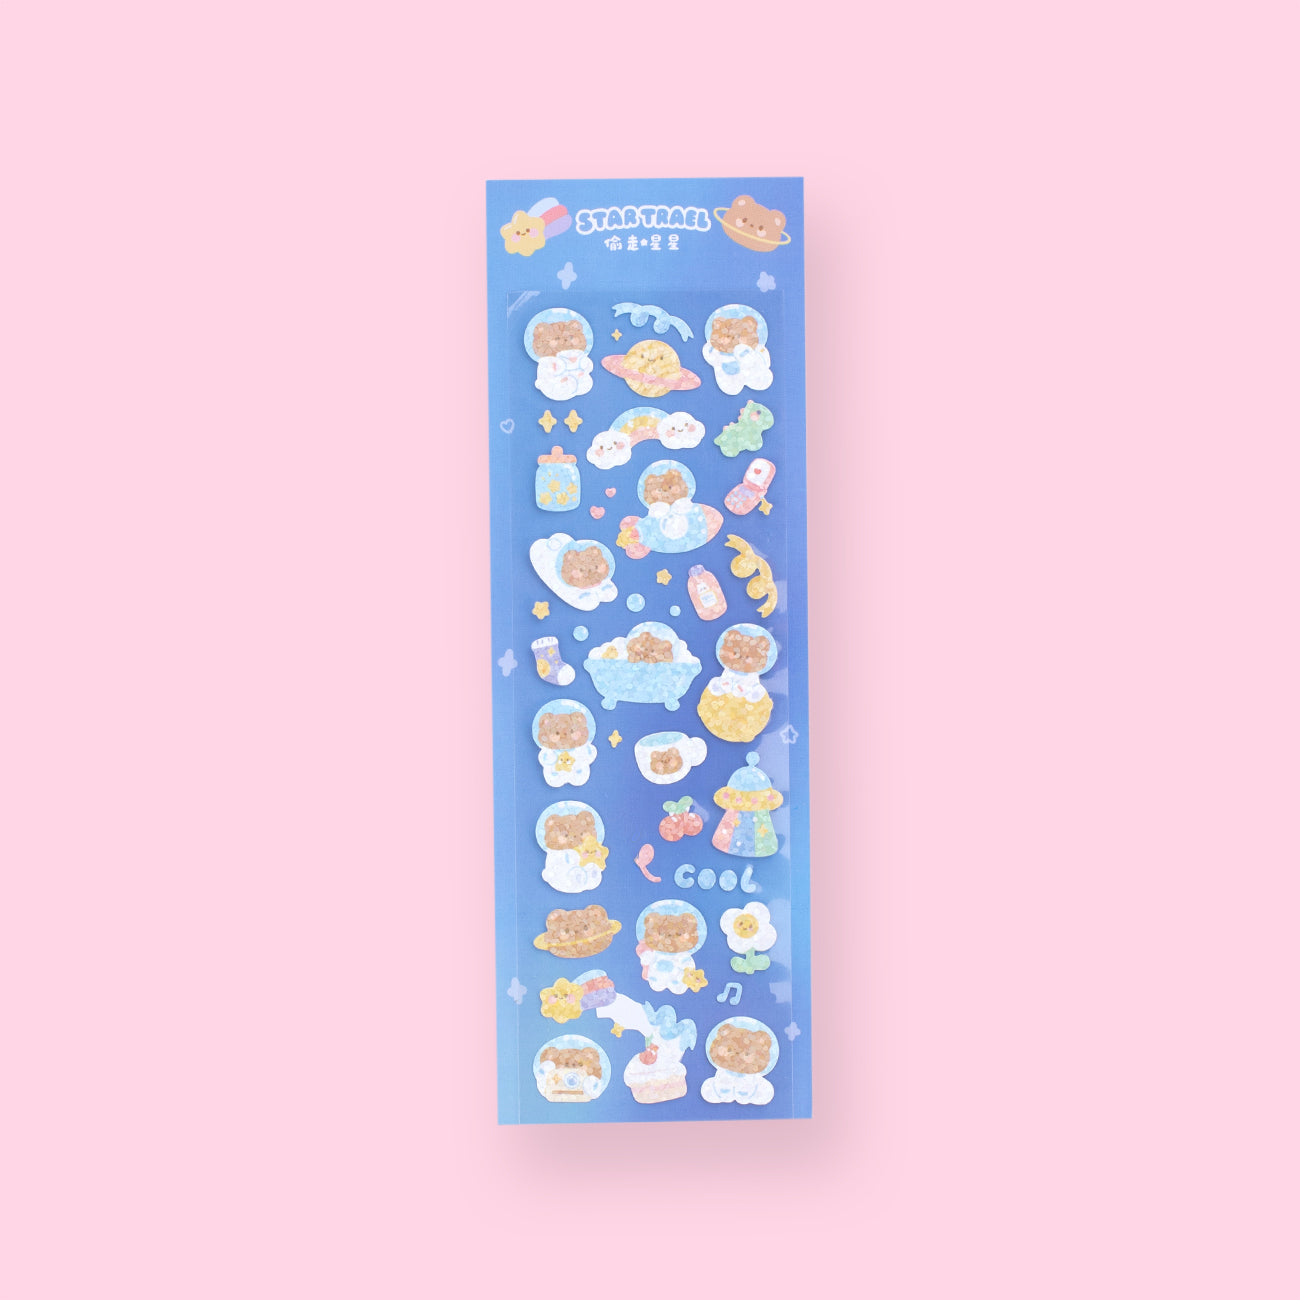 Polco stickers sheet pack set